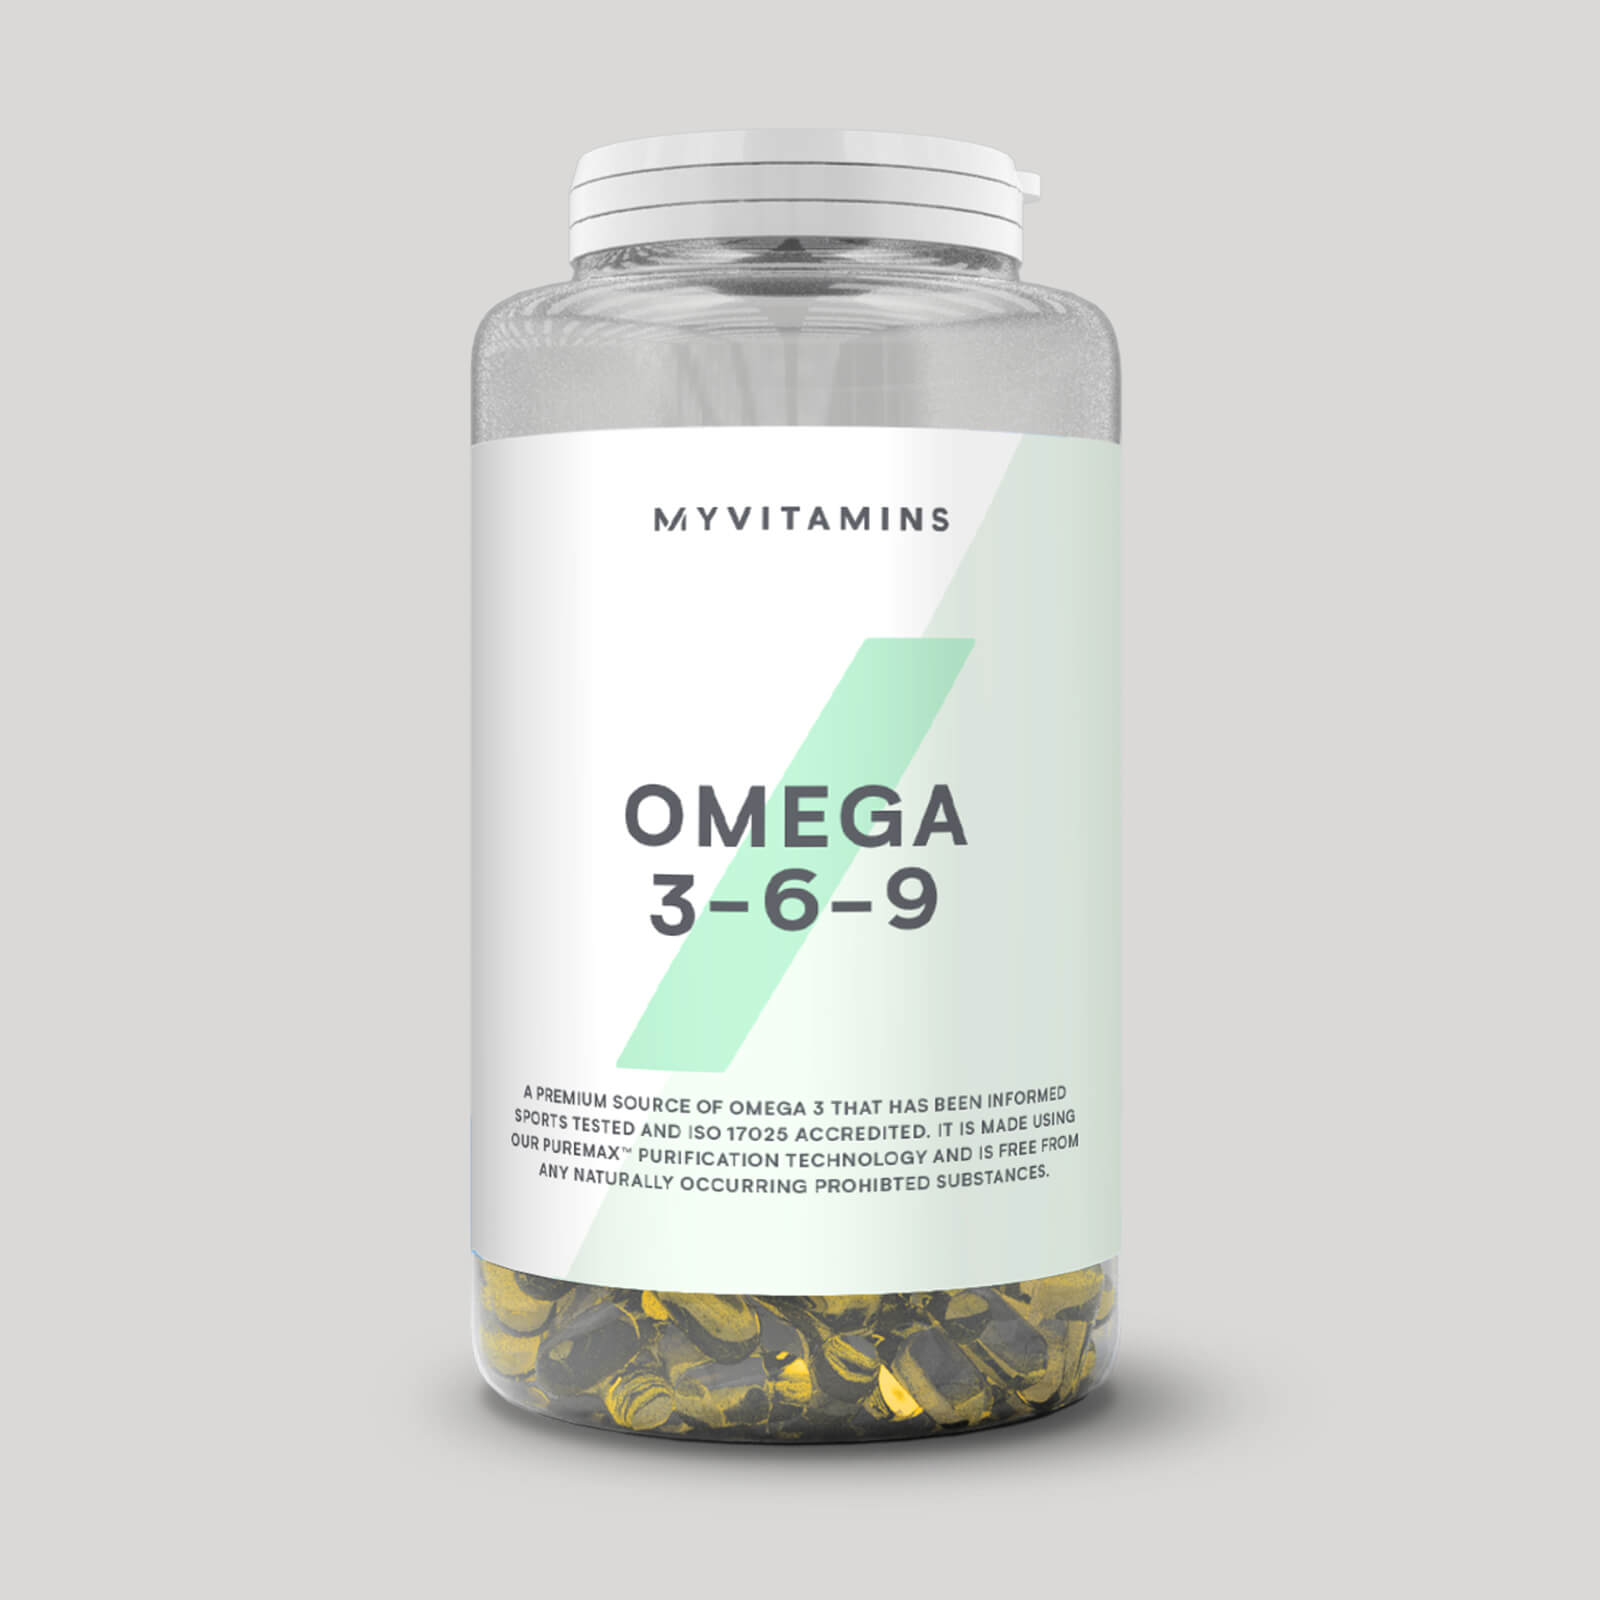 Myprotein Omega 3 6 9 500mg - 120Tablets